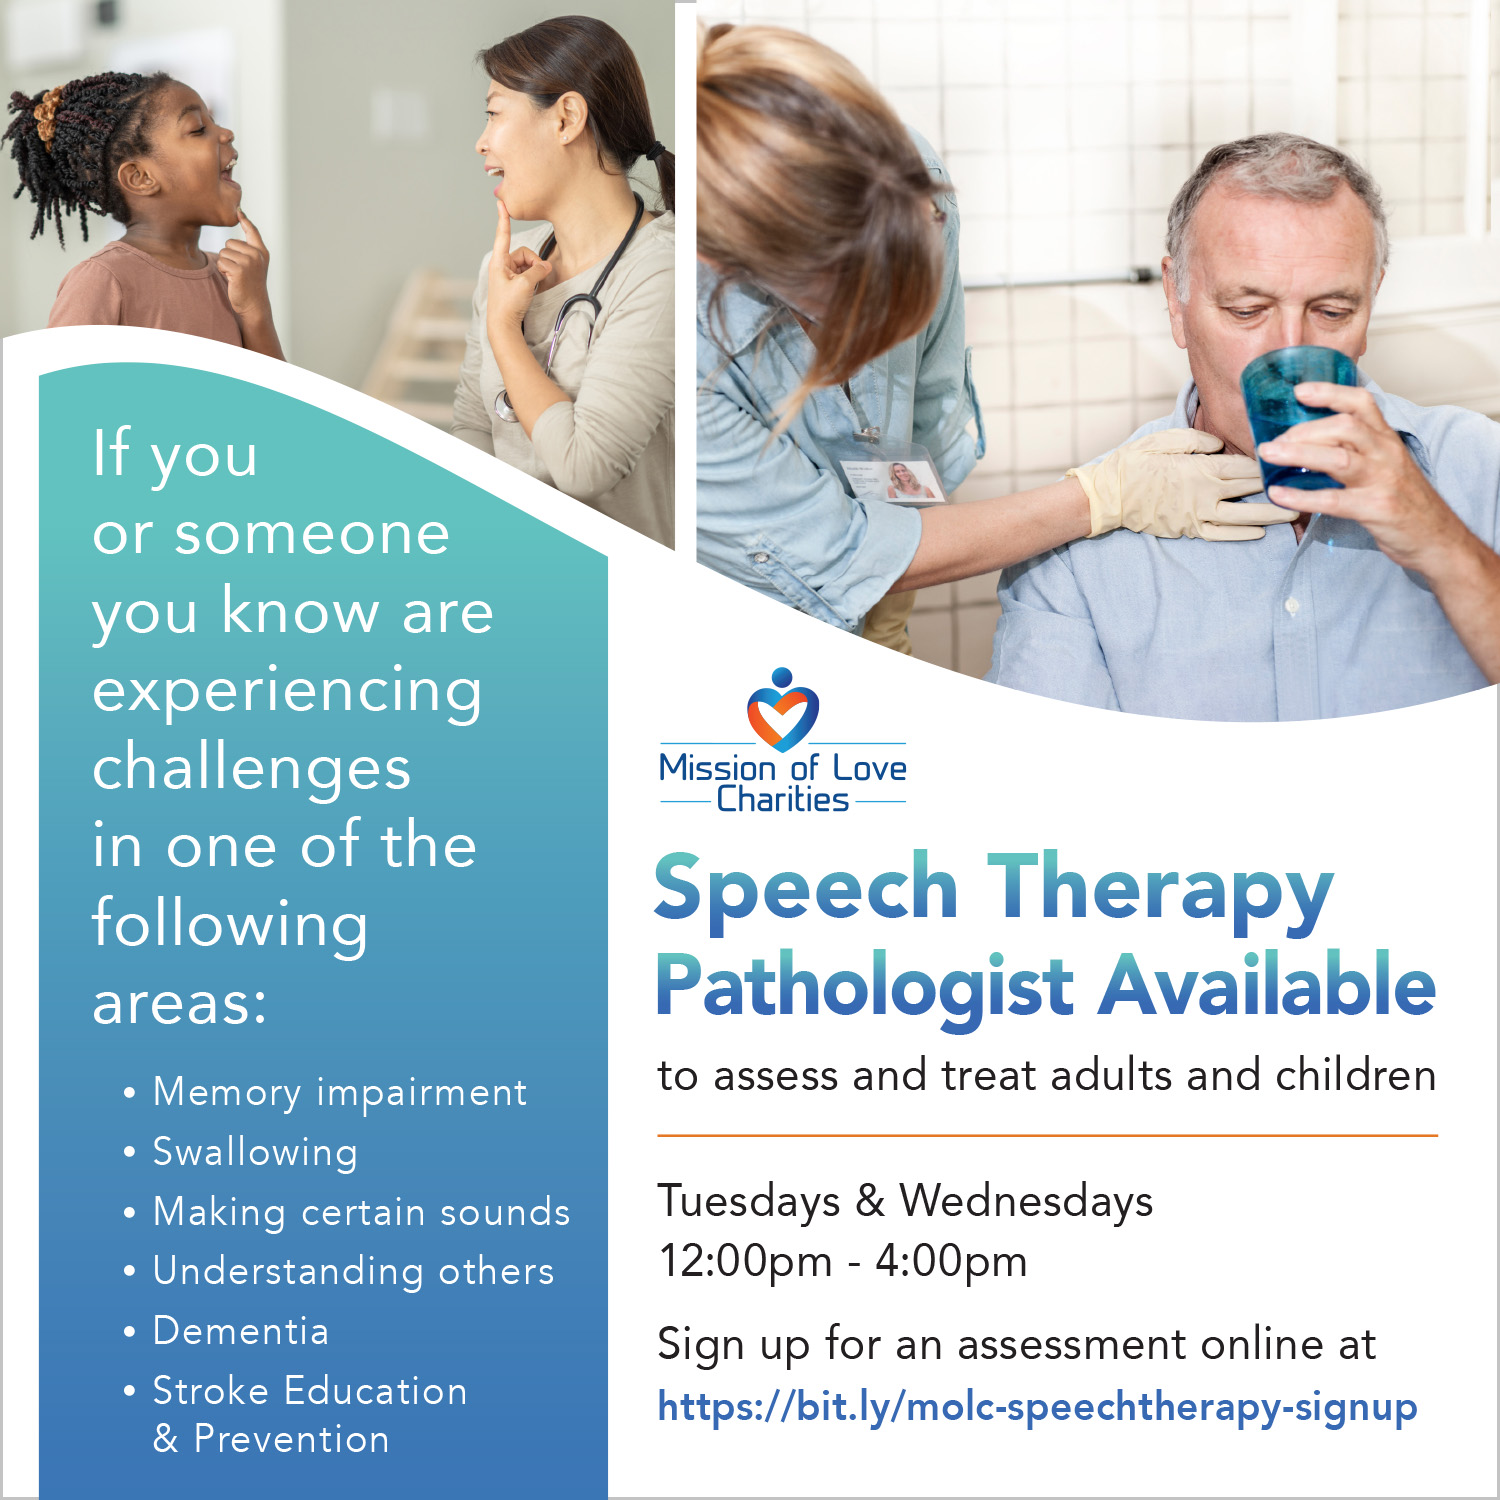 Speech Therapy Pathologist Available to Assess & Treat Adults & Children